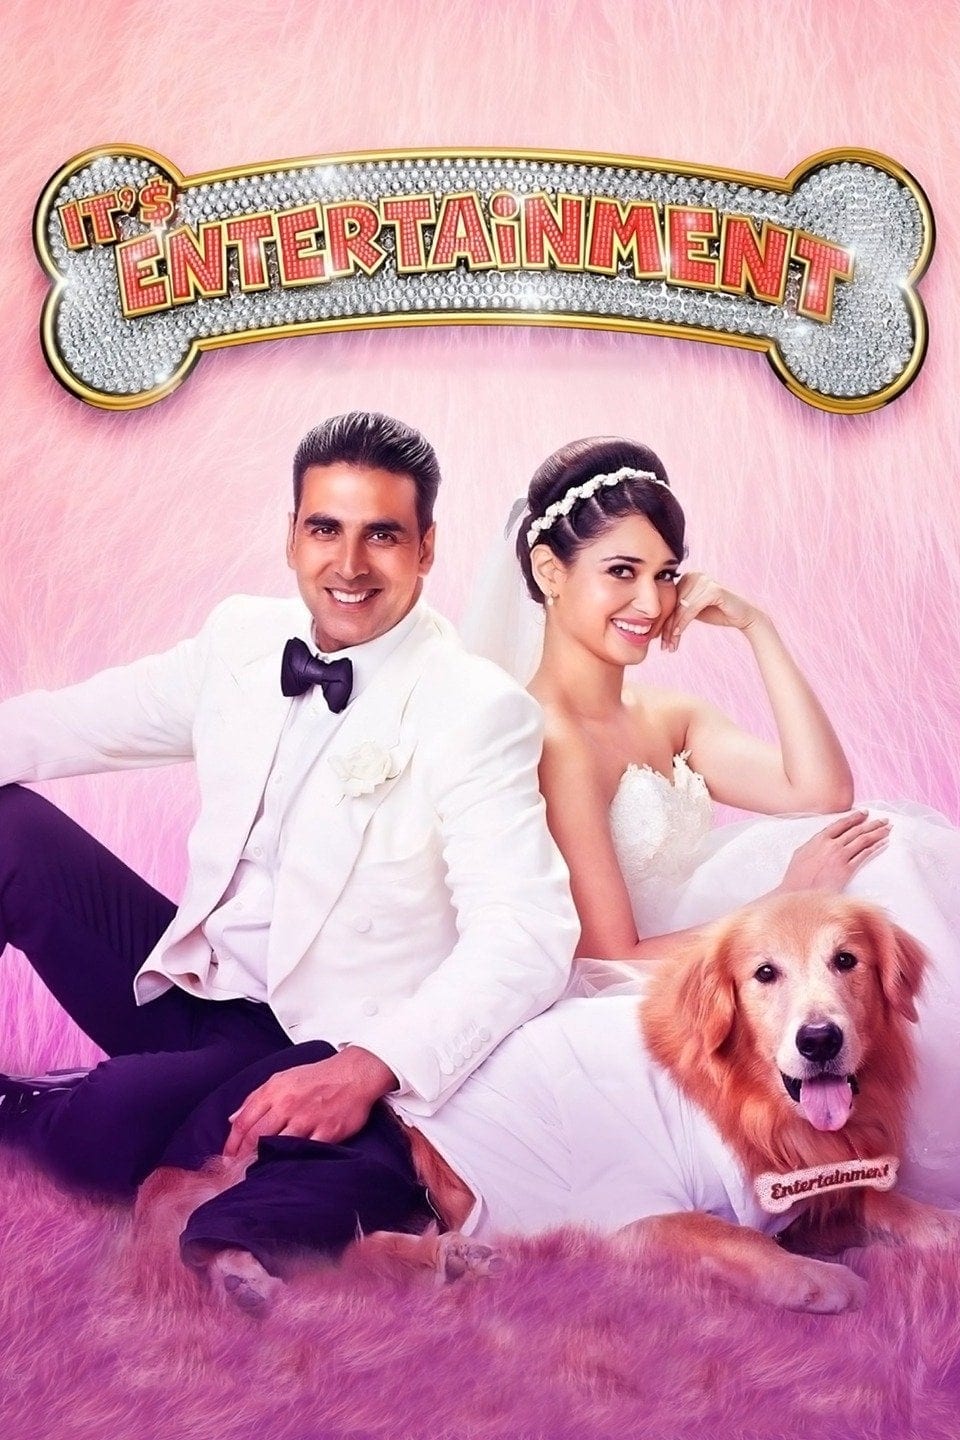 Poster for the movie "Entertainment"